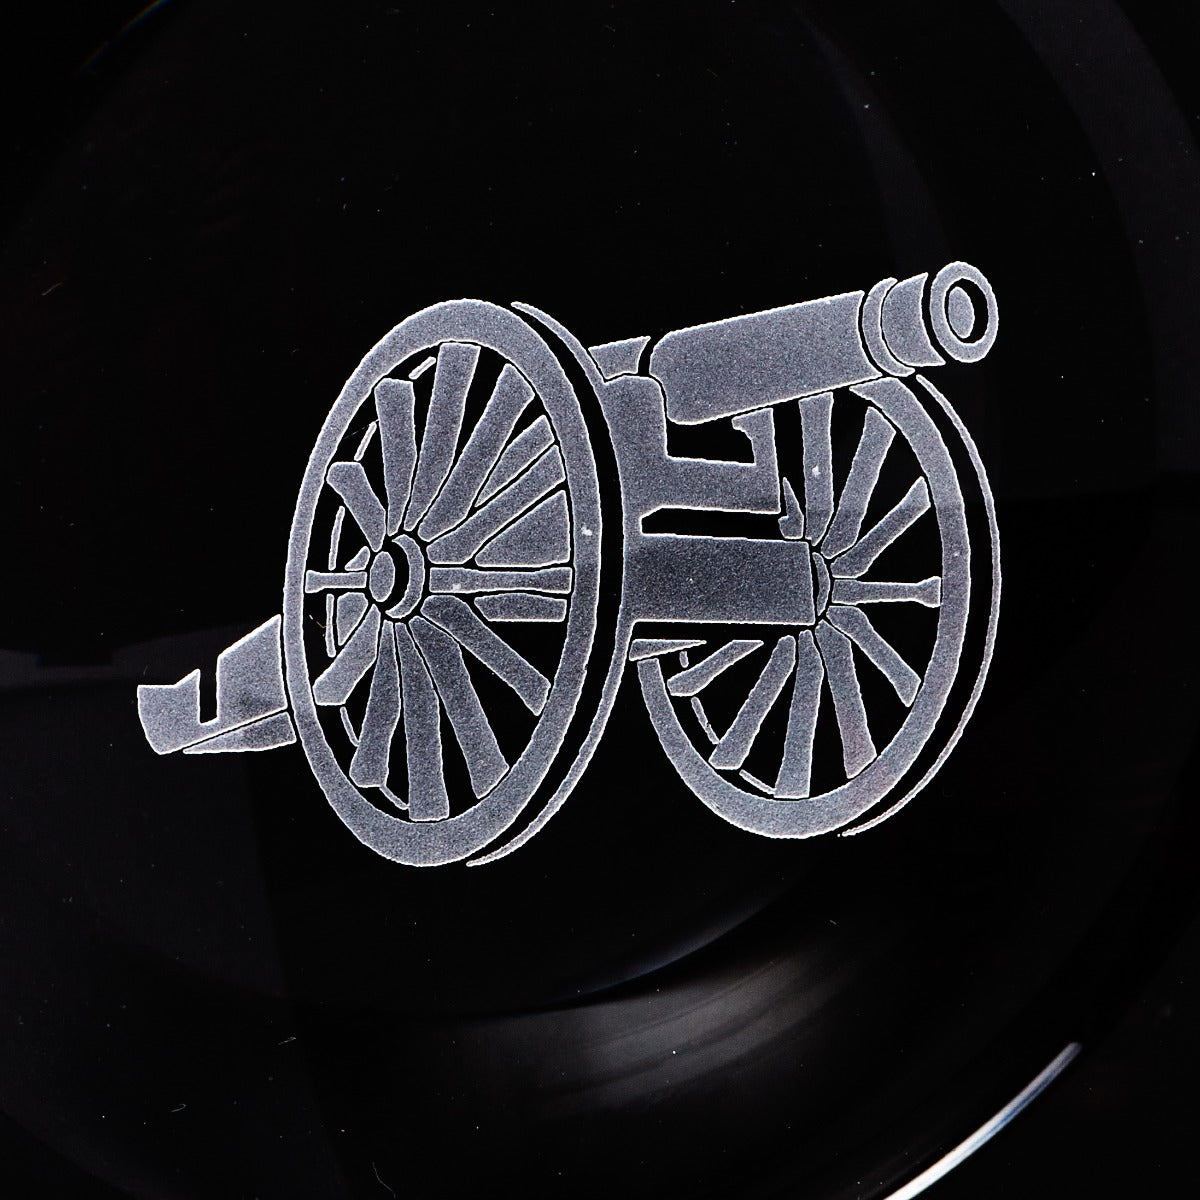 A black plate with an image of a cannon, perfect as a smoking accessory for finer cigars is the Kirby Allison Glass Cigar Ash Tray - Round from KirbyAllison.com.